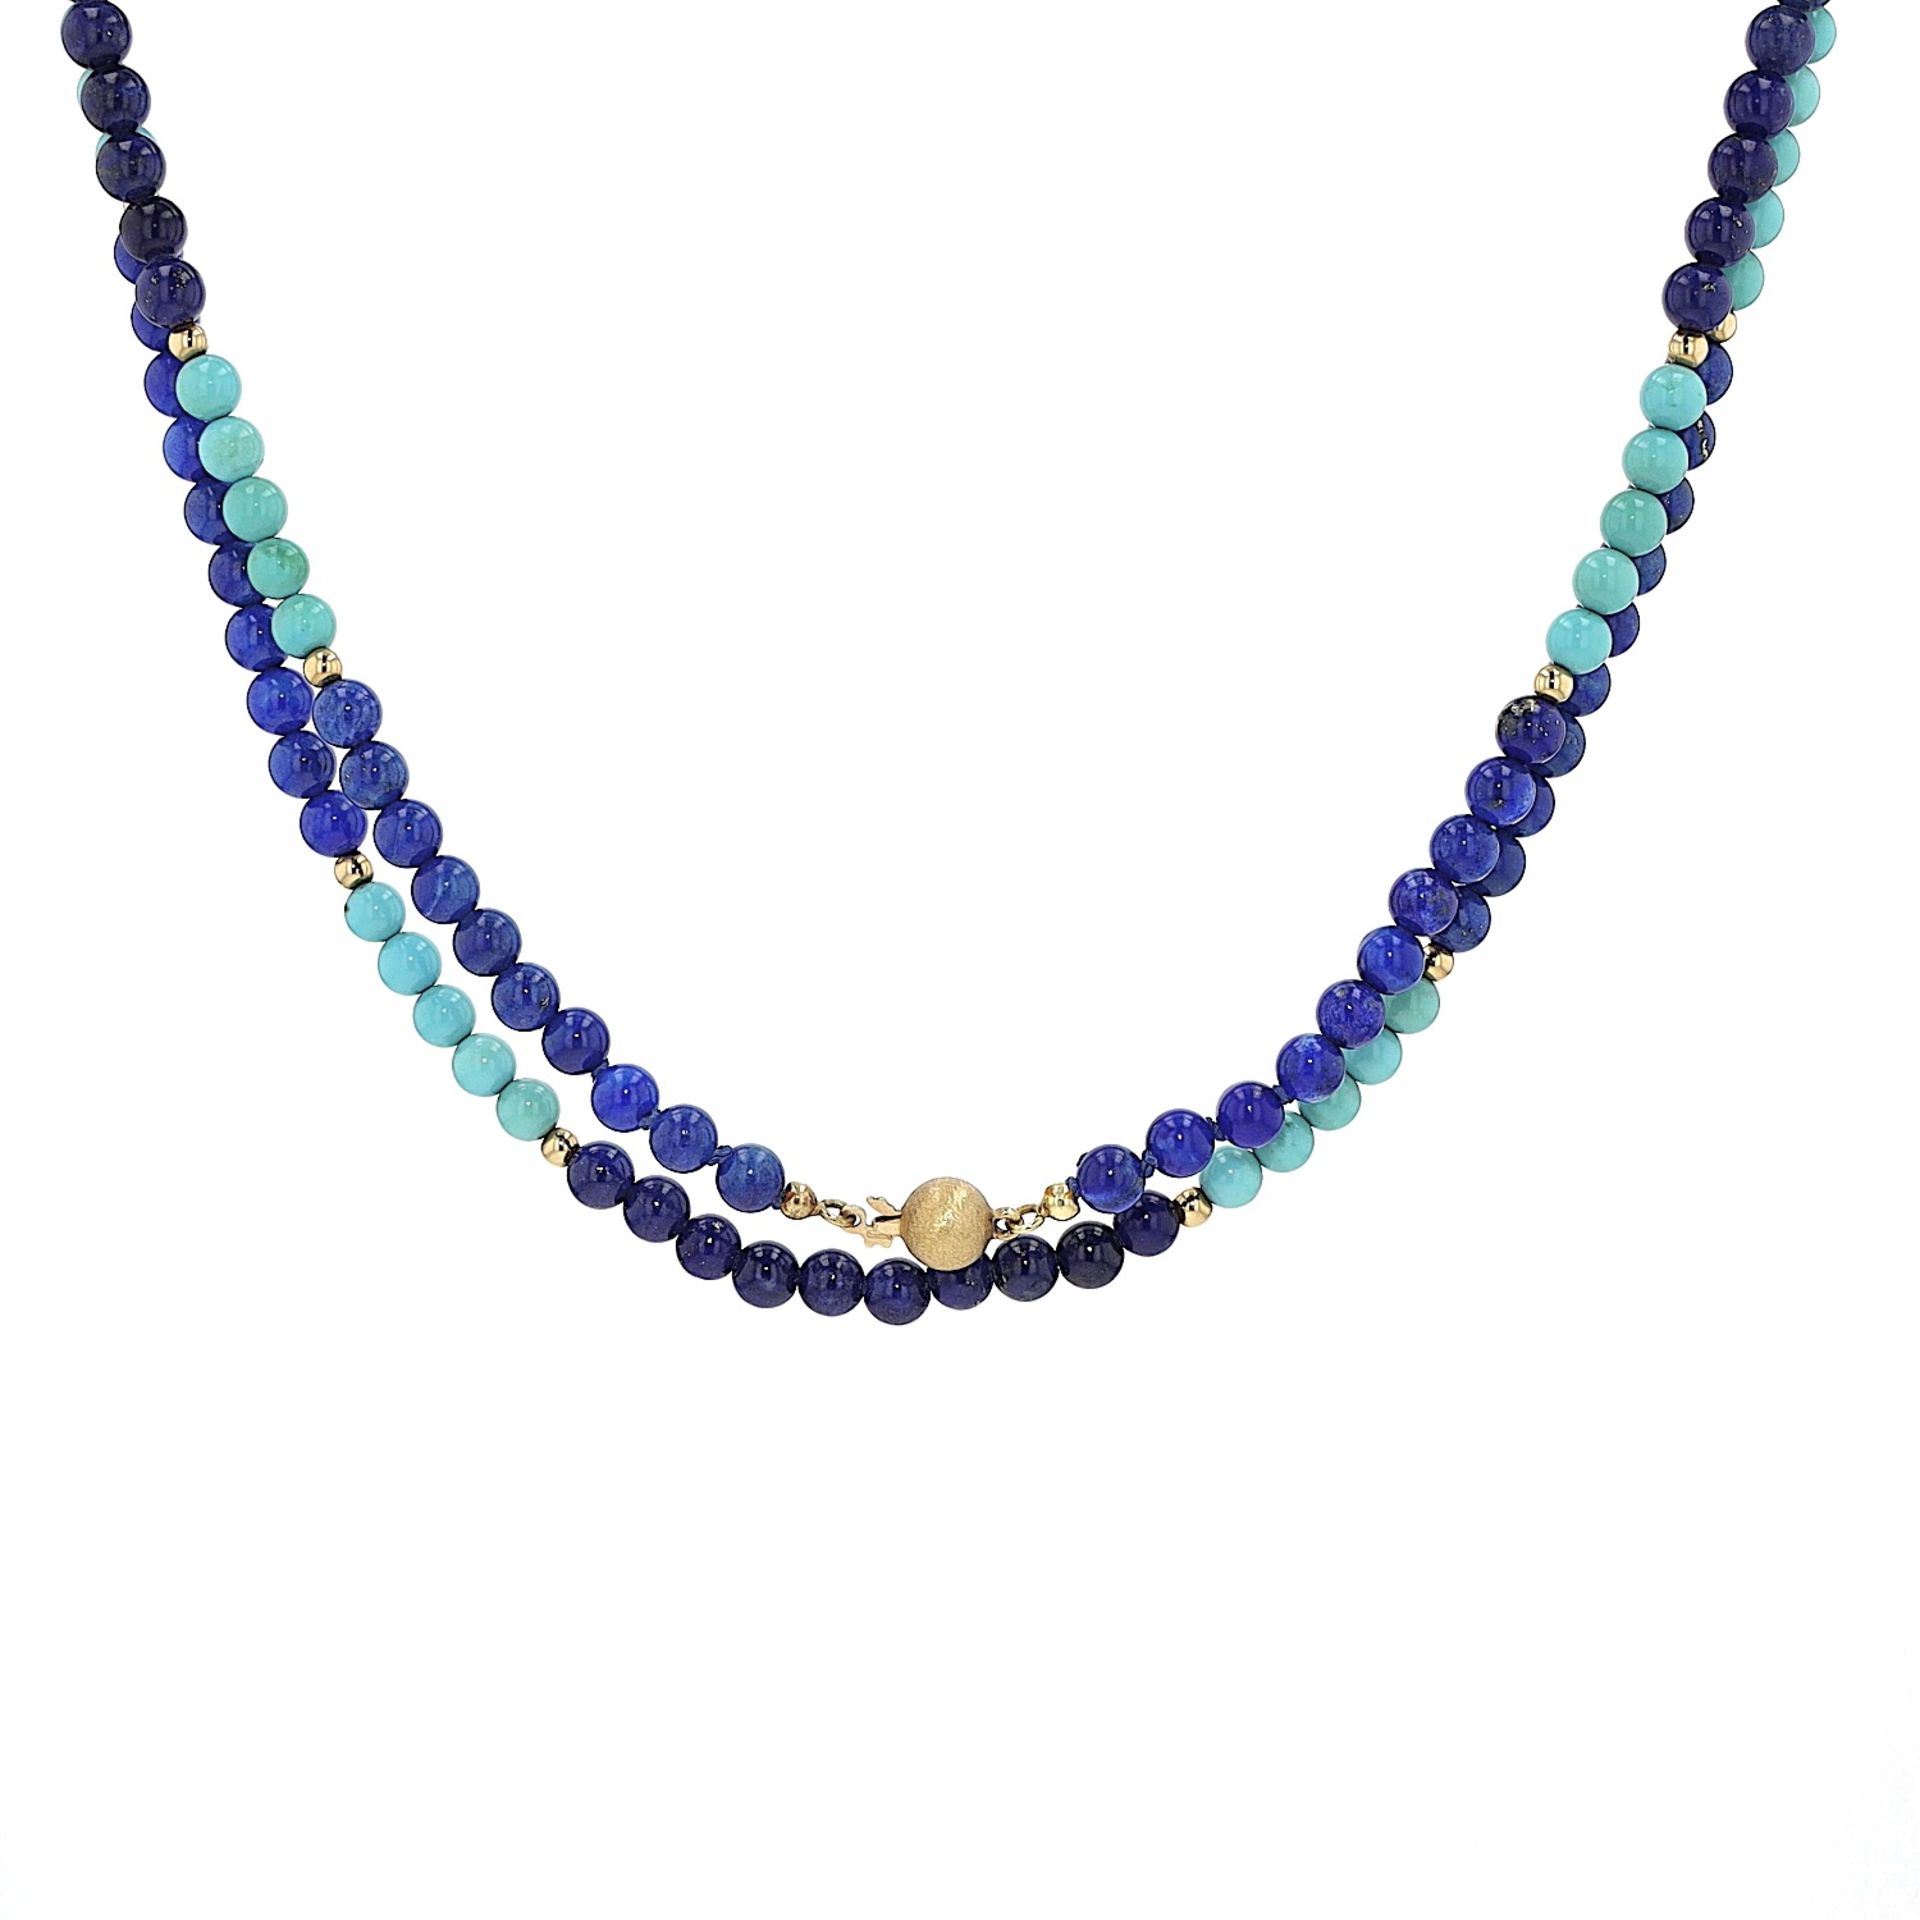 Necklace with gold beads and gemstone